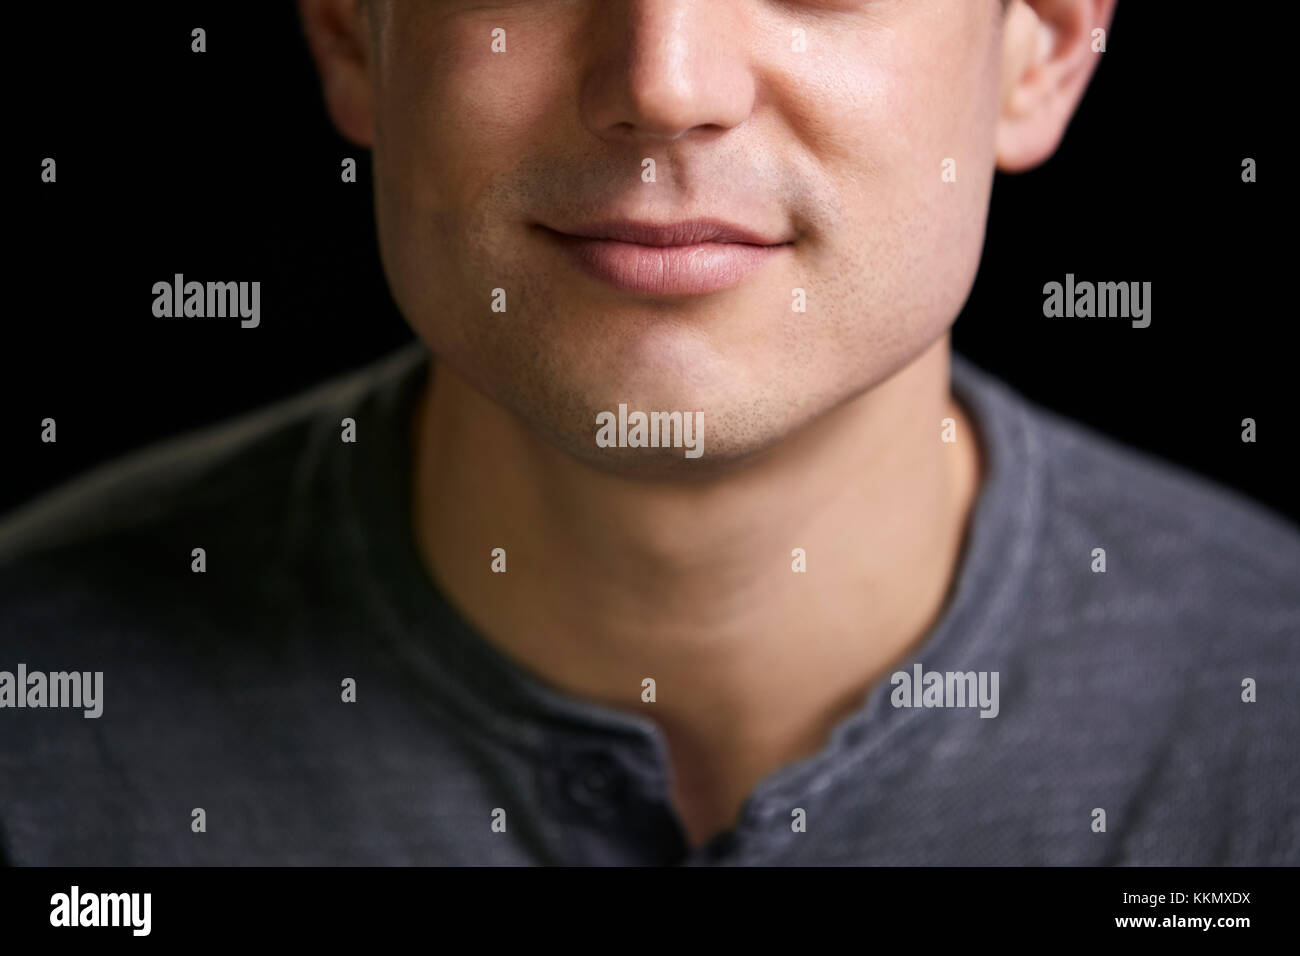 Cropped portrait of a smiling young white man Stock Photo